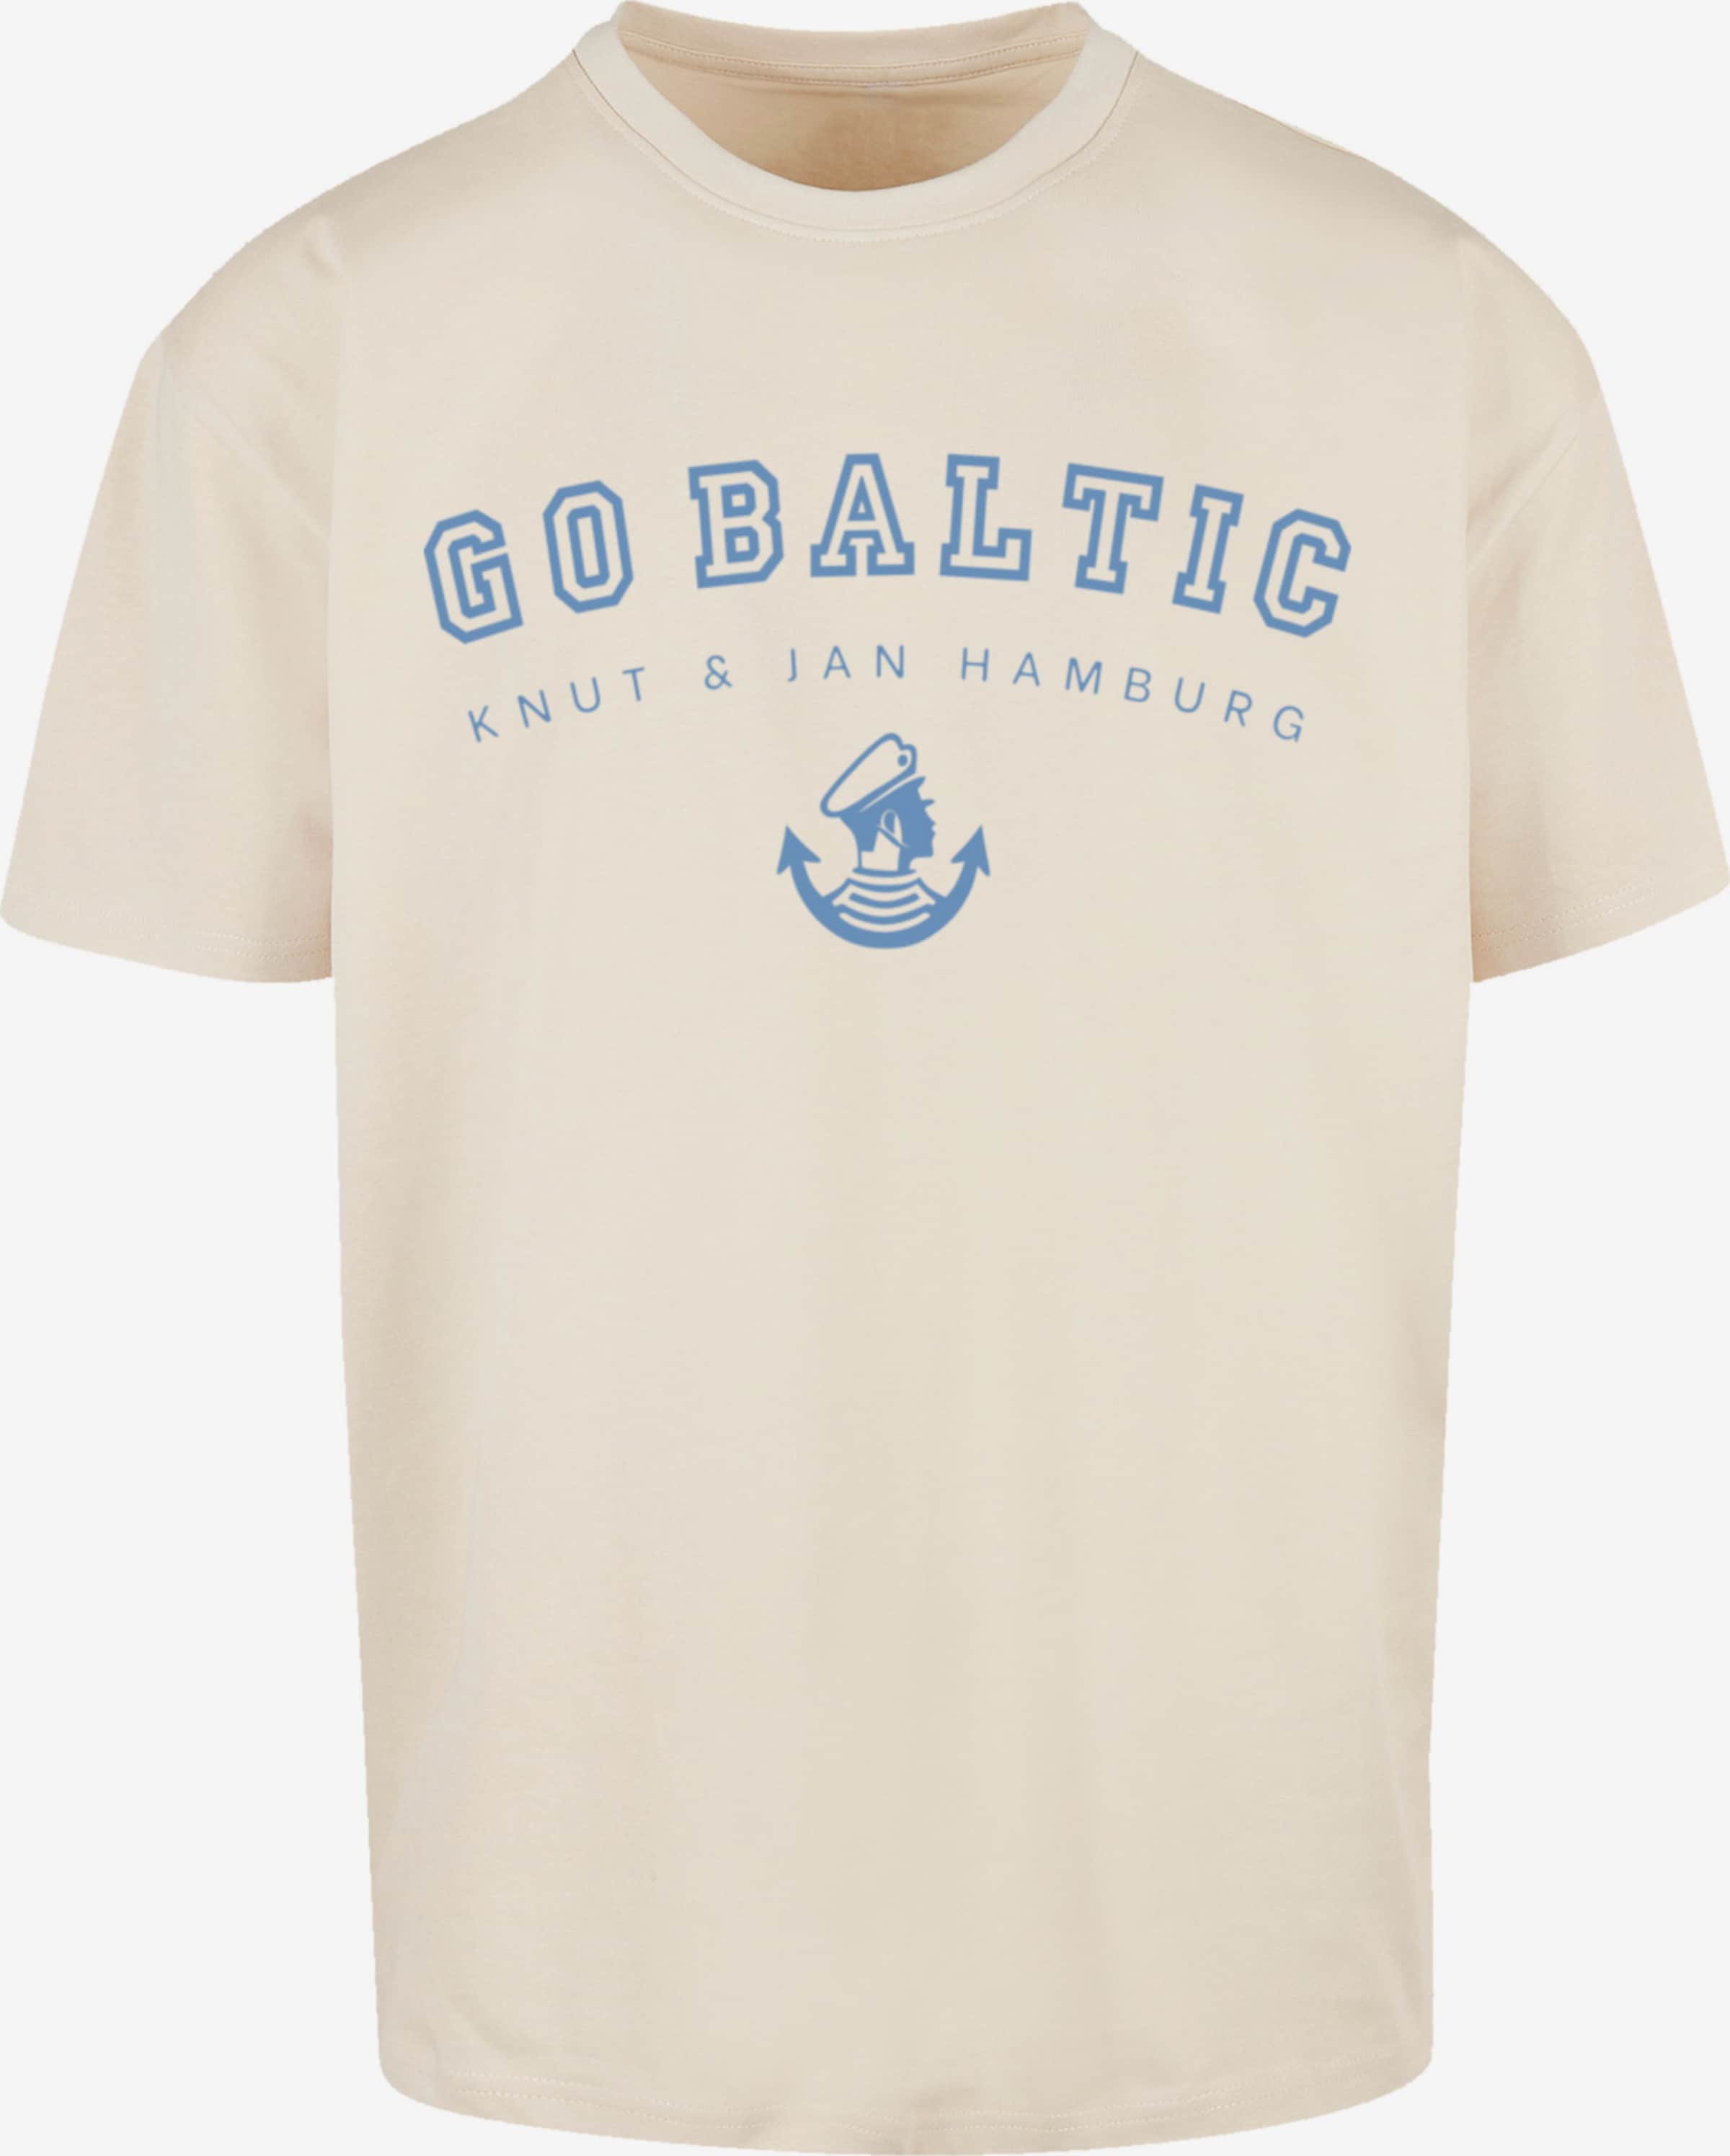 F4NT4STIC Shirt 'Go Baltic Ostsee Knut & Jan Hamburg' in Sand | ABOUT YOU